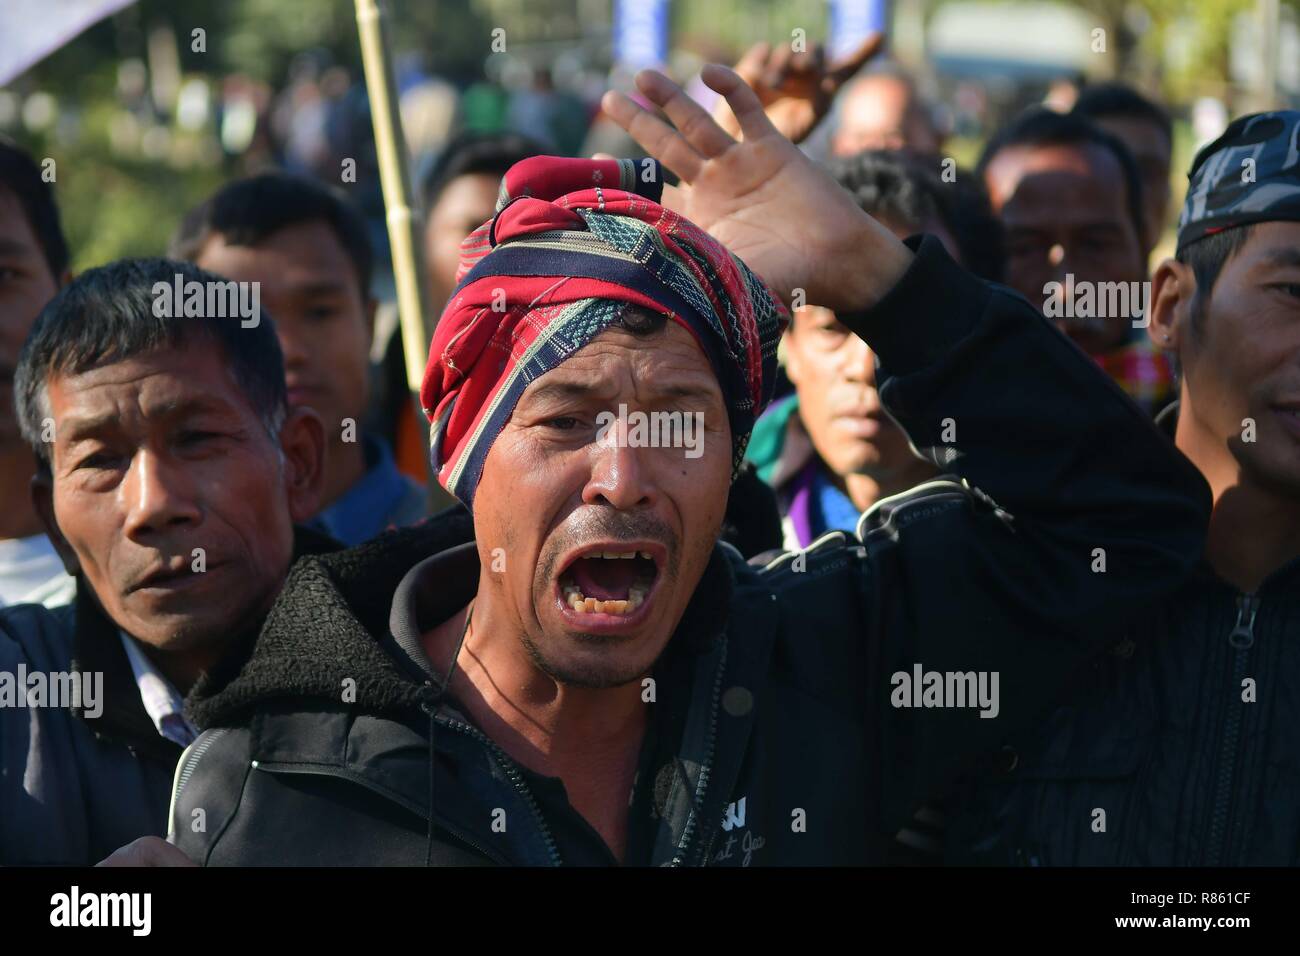 Agartala, Tripura, India. 10th Dec, 2018. A protester seen chanting slogans during the protest.INPT (Indigenous Nationalist Party of Twipra) leaders and supporters protest on the National High way in Khamtingbari, 40 km far from Agartala city to demand for the withdrawal of Citizenship Bill that was Introduced in July 19 in Lok Sabha, the Citizenship Amendment Bill 2016 seeks to allow illegal migrants from certain minority communities in Afghanistan, Bangladesh and Pakistan eligible for Indian citizenship. In other words, it amends the Citizenship Act of 1955. (Credit Image: © Abhisek Sa Stock Photo